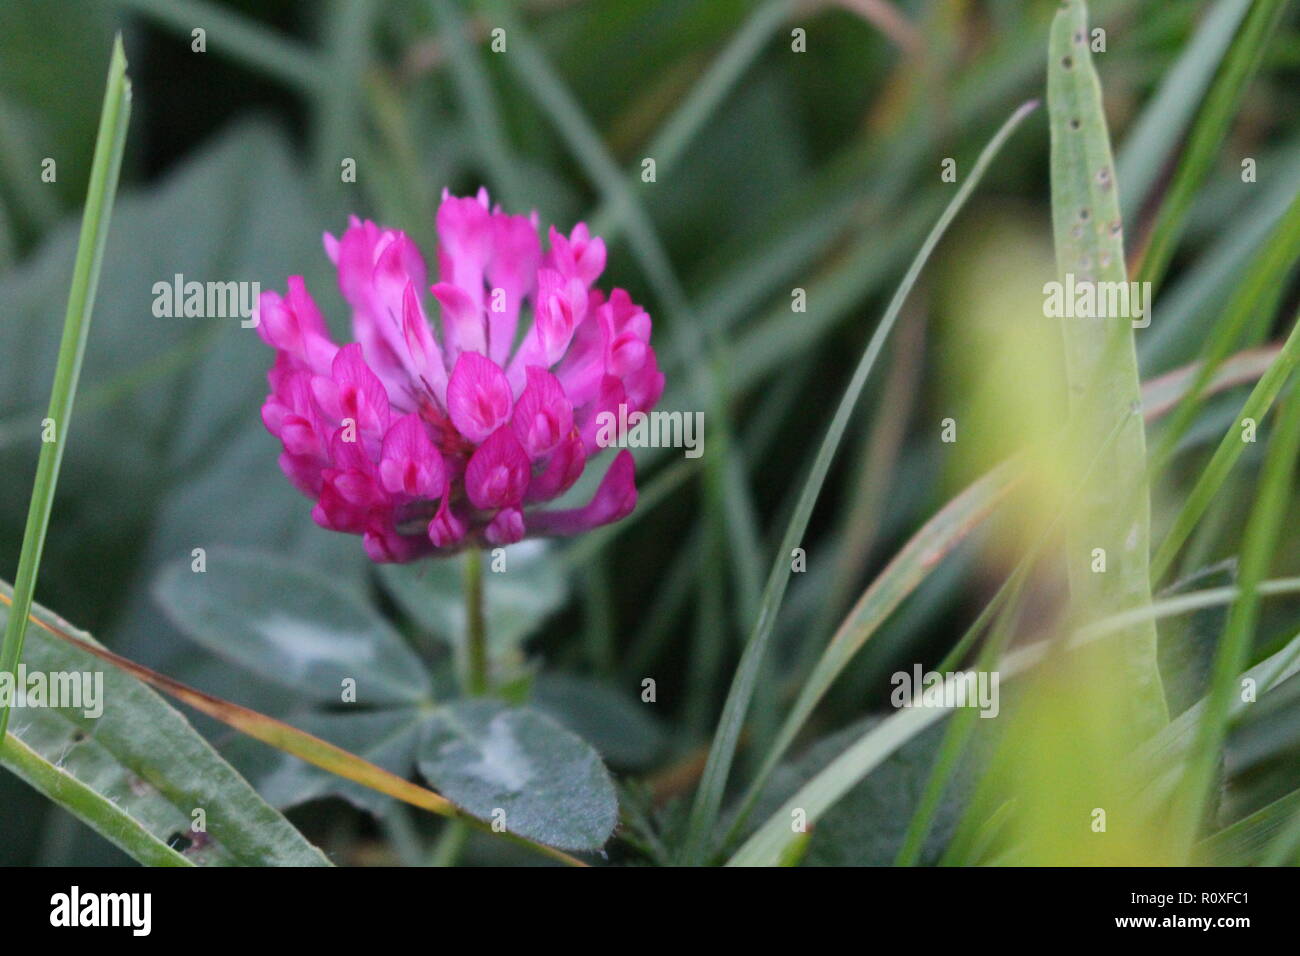 A red clover, also known as the state flower of Vermont and national flower of Denmark. Stock Photo